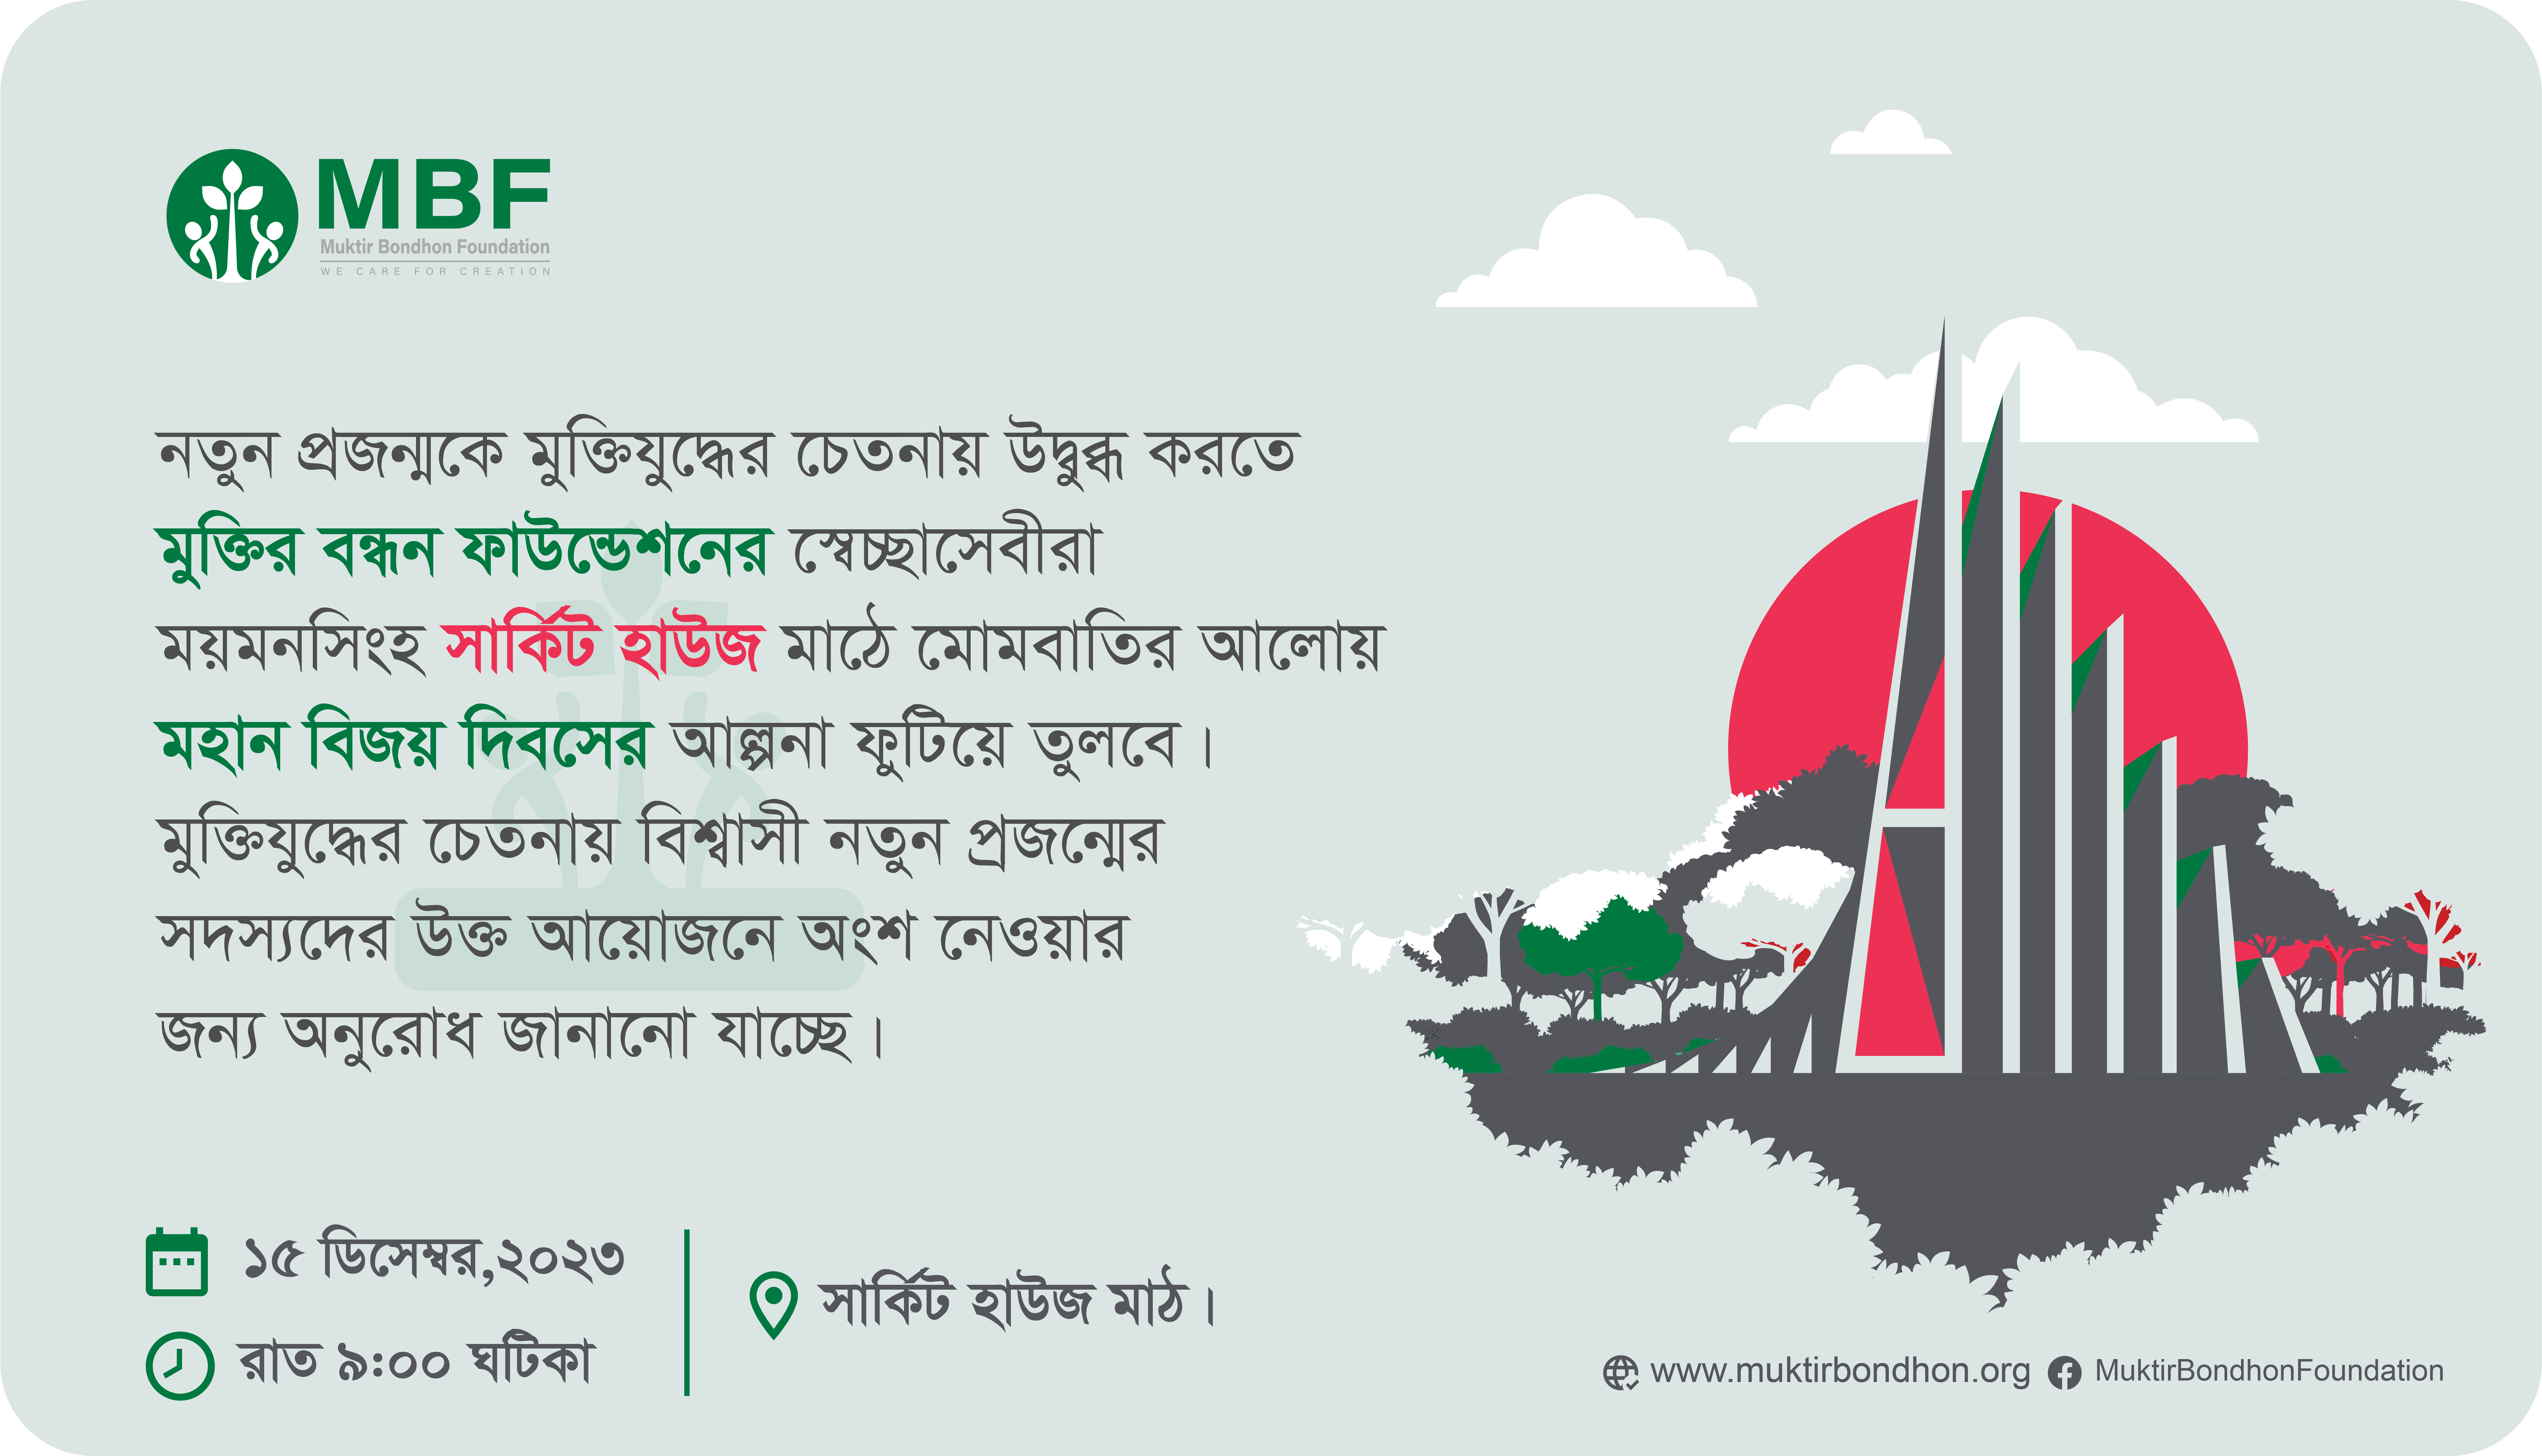 Muktirbondhon Celebrate the victory day with light of candles